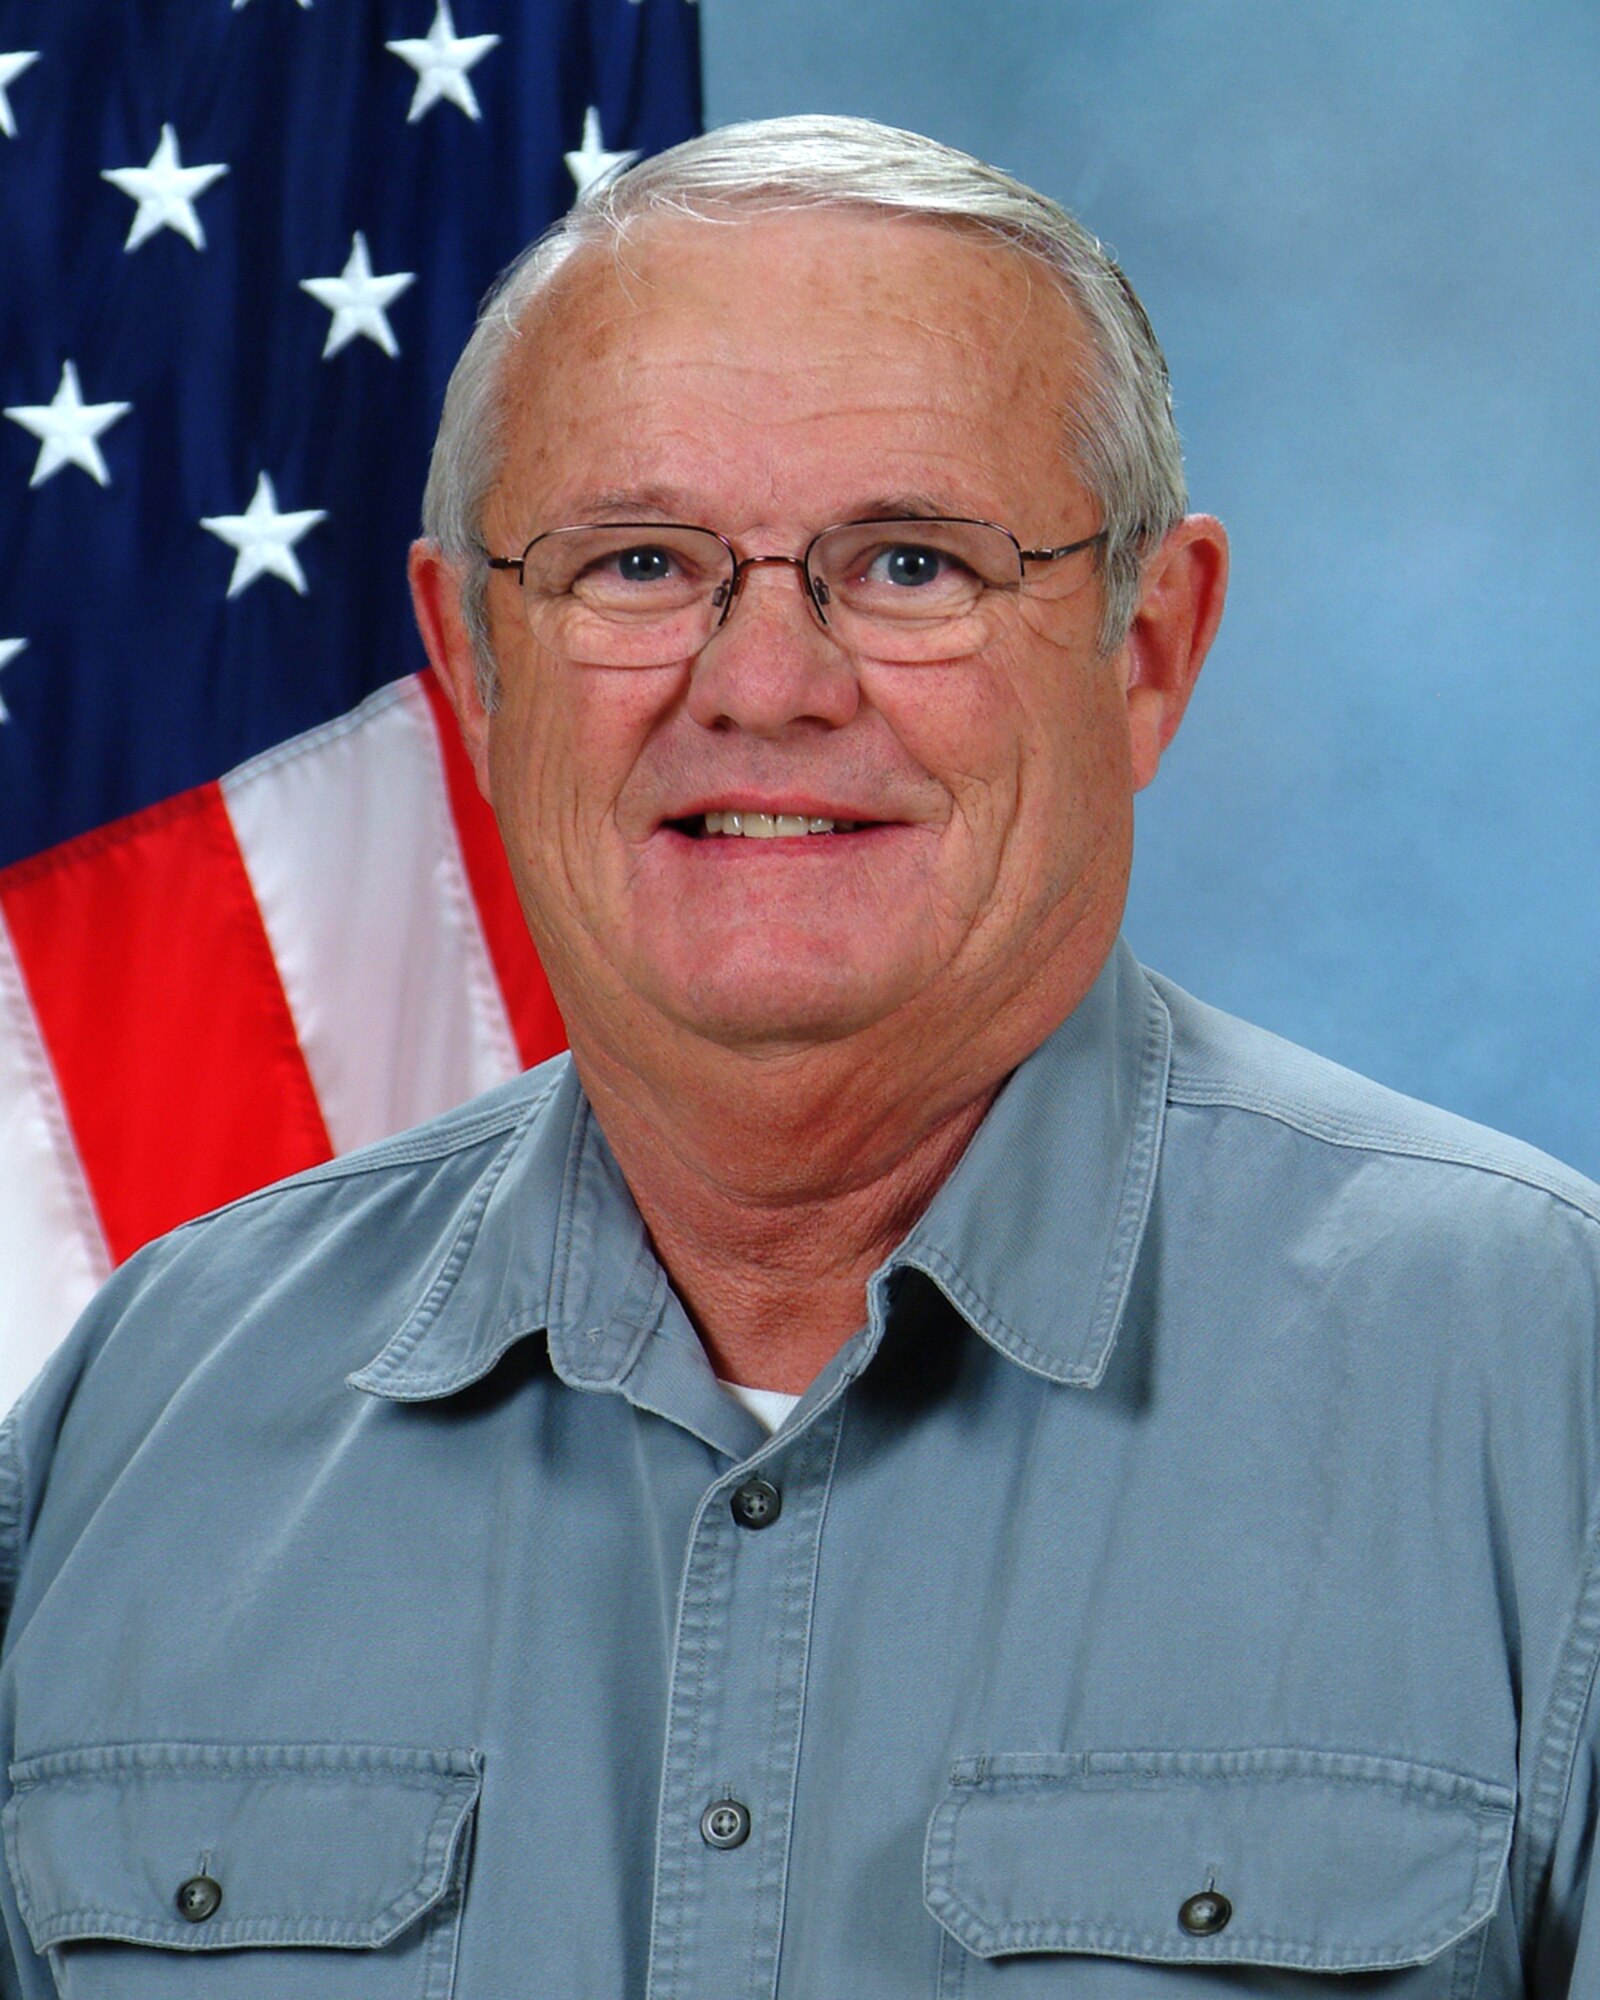 Lanny Eller, 21st Civil Engineer Squadron, has had a remarkable 2007, earning recognition as the 14th Air Force Civilian of the quarter, two Team Pete awards, three 21st Space Wing, and four 21st Mission Support Group level awards. During 2007, Mr. Eller led his 23-man shop to complete more than 1,800 jobs. His leadership and oversight of numerous Peterson projects, including the STRIPES club renovation, airfield obstruction light replacements, education center electrical upgrades and $2  million land mobile radio network install, were critical to mission success. Mr. Eller’s outstanding accomplishments culminated in his unit being named the Best Civil Engineer Squadron in the Air Force for 2007. (Air Force photo) 